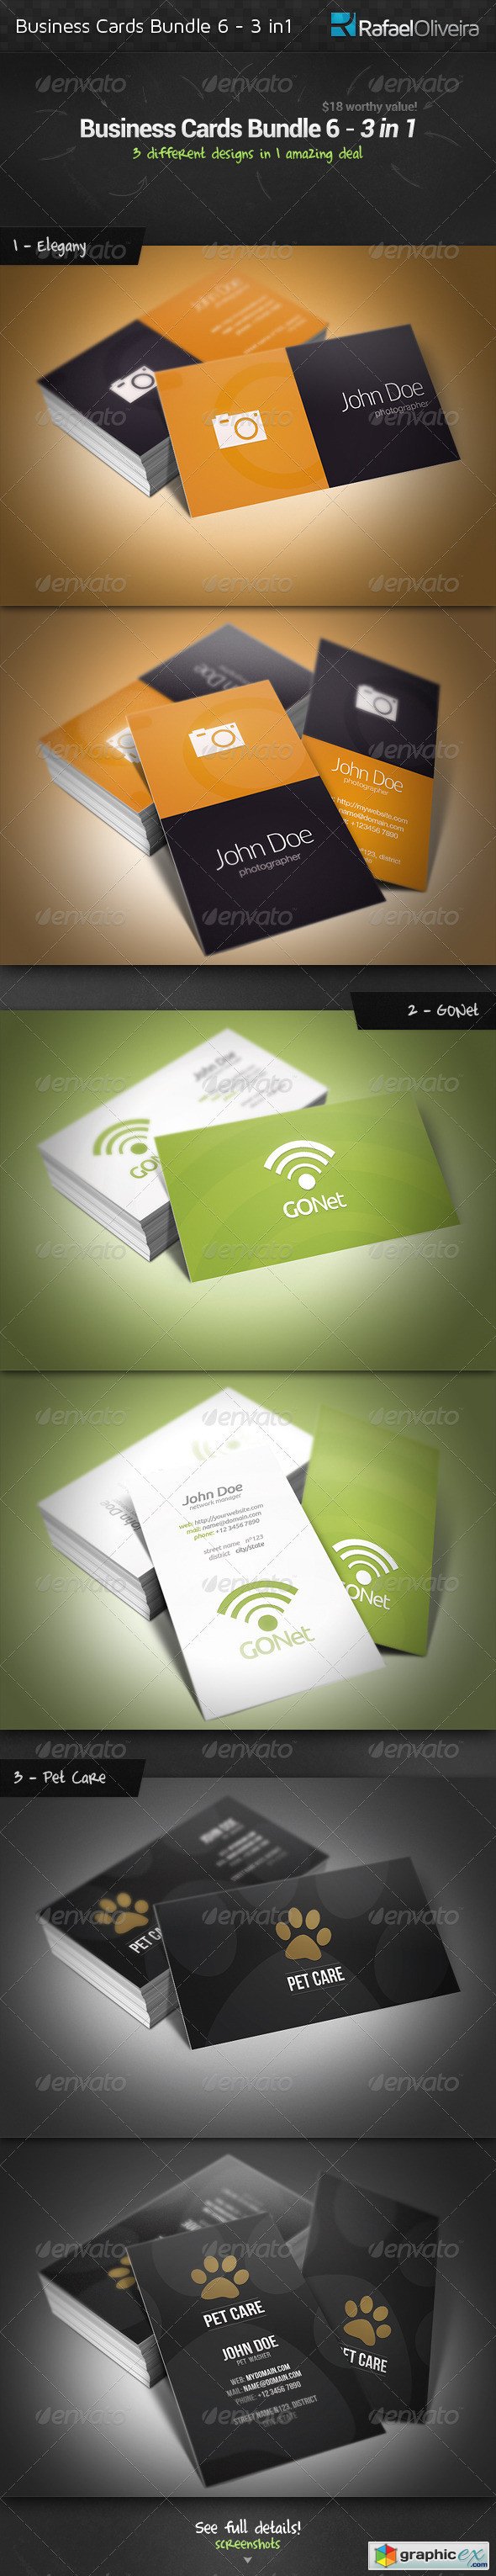 Business Cards Bundle 6 - 3 in 1